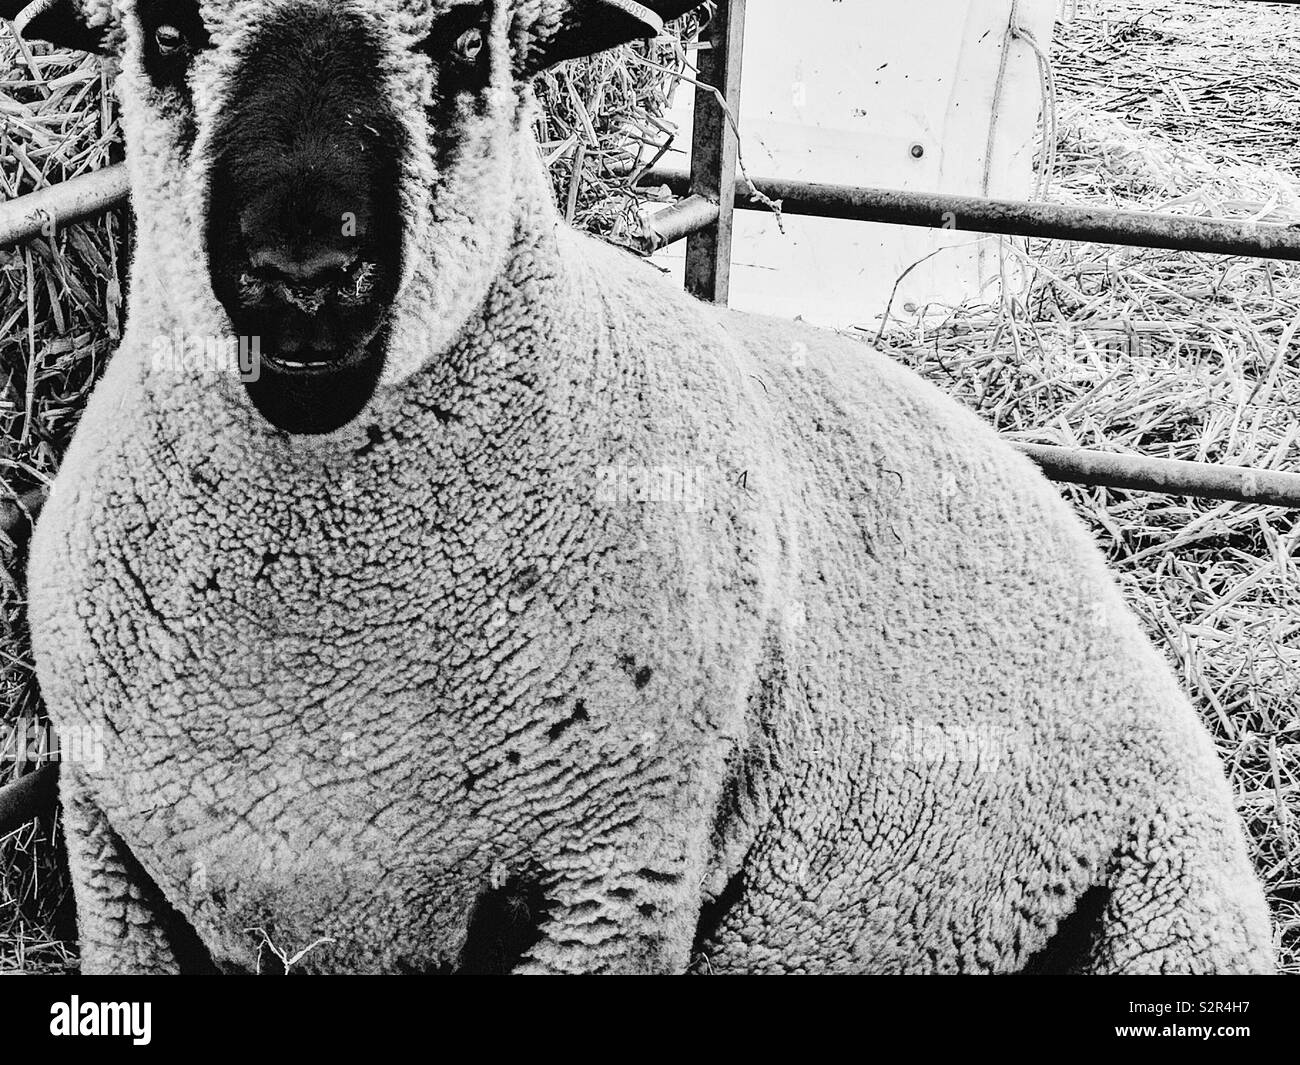 Black and white image of a Hampshire Down sheep in pen. Originated around 1829 from cross of Southdowns and the Old Hampshire breed Stock Photo